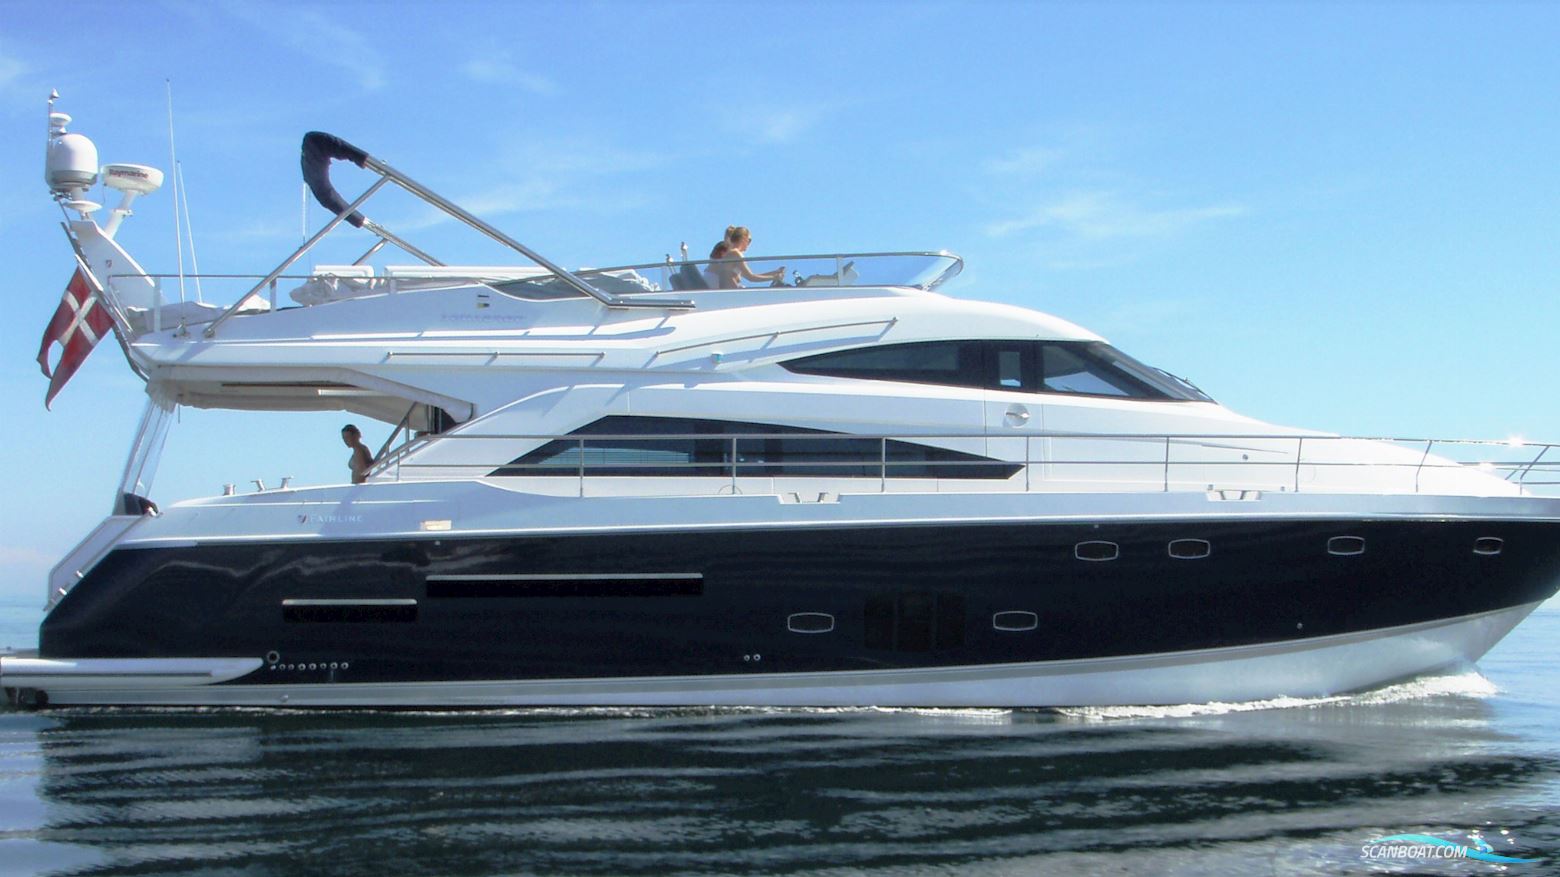 Fairline Squadron 65 Motor boat 2009, with MAN engine, Denmark